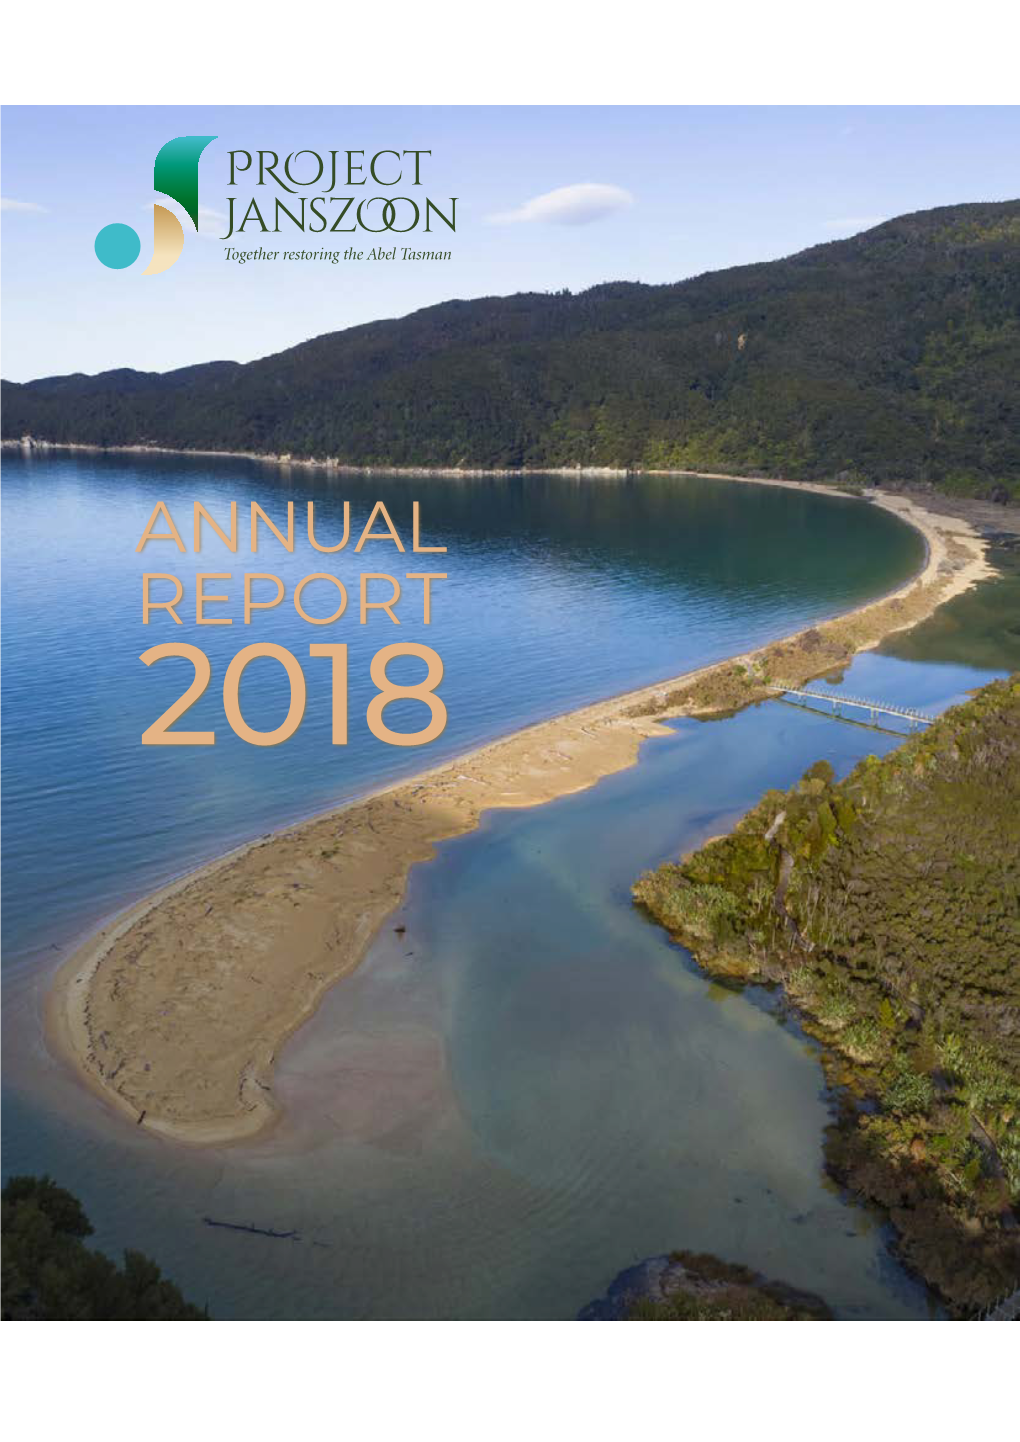 Project Janszoon Annual Report 2018 Contents